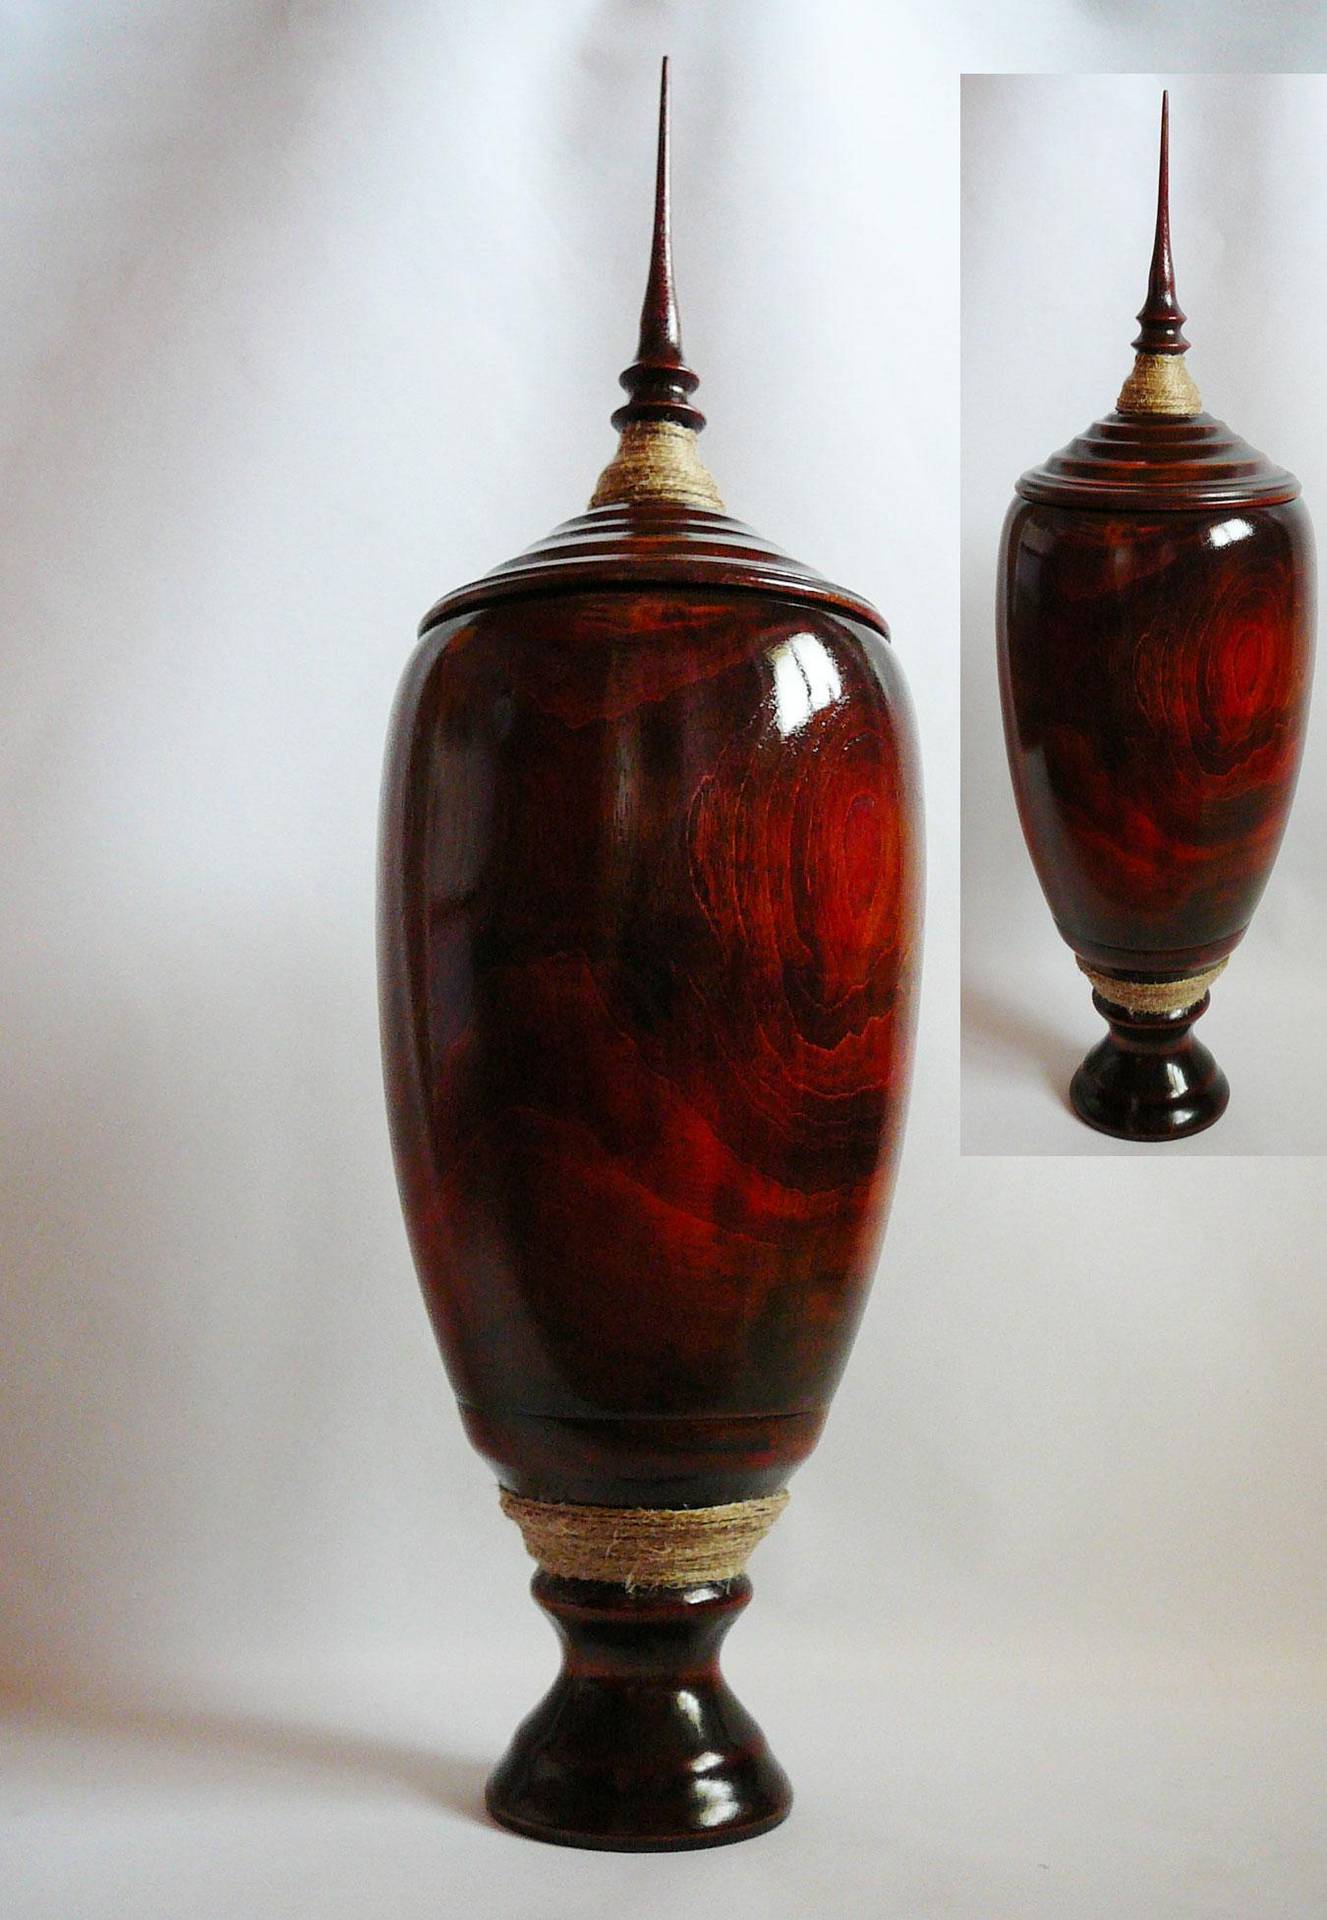 Urn Walnut: turning, painting, lacquer. Size: height 58 cm, diameter 18 cm